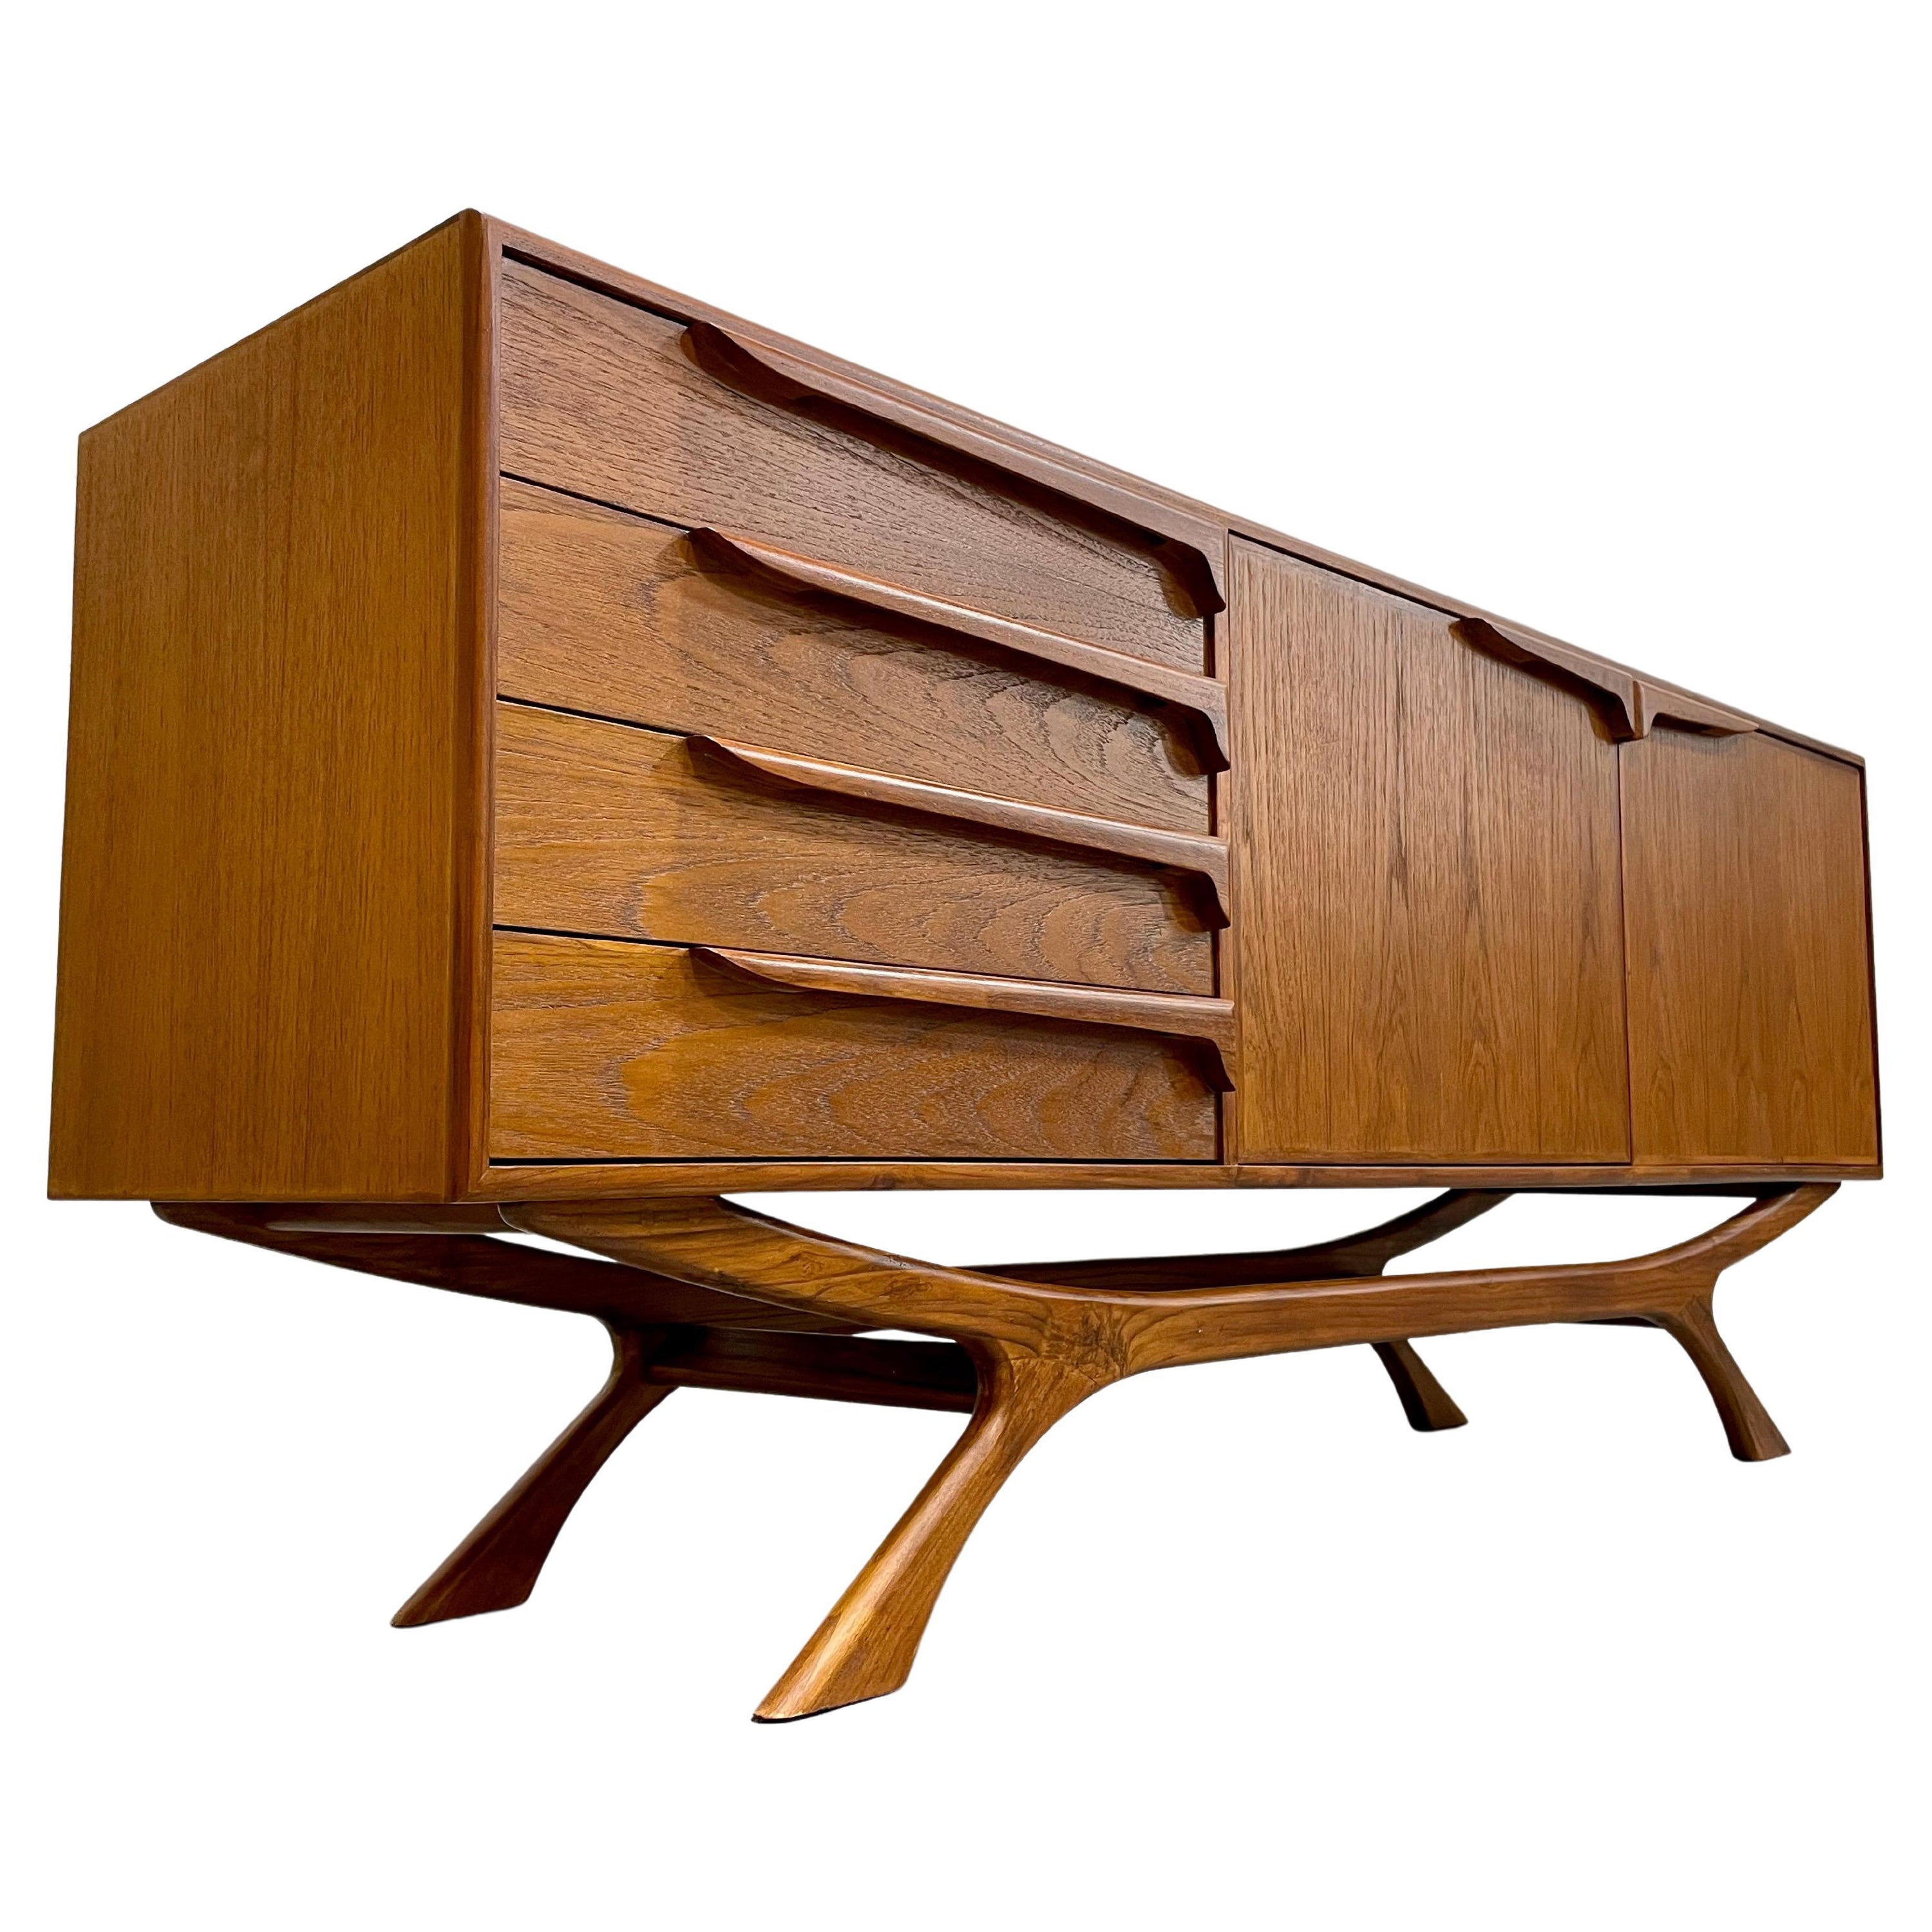 MONUMENTAL Mid Century Modern styled Teak CREDENZA media stand For Sale